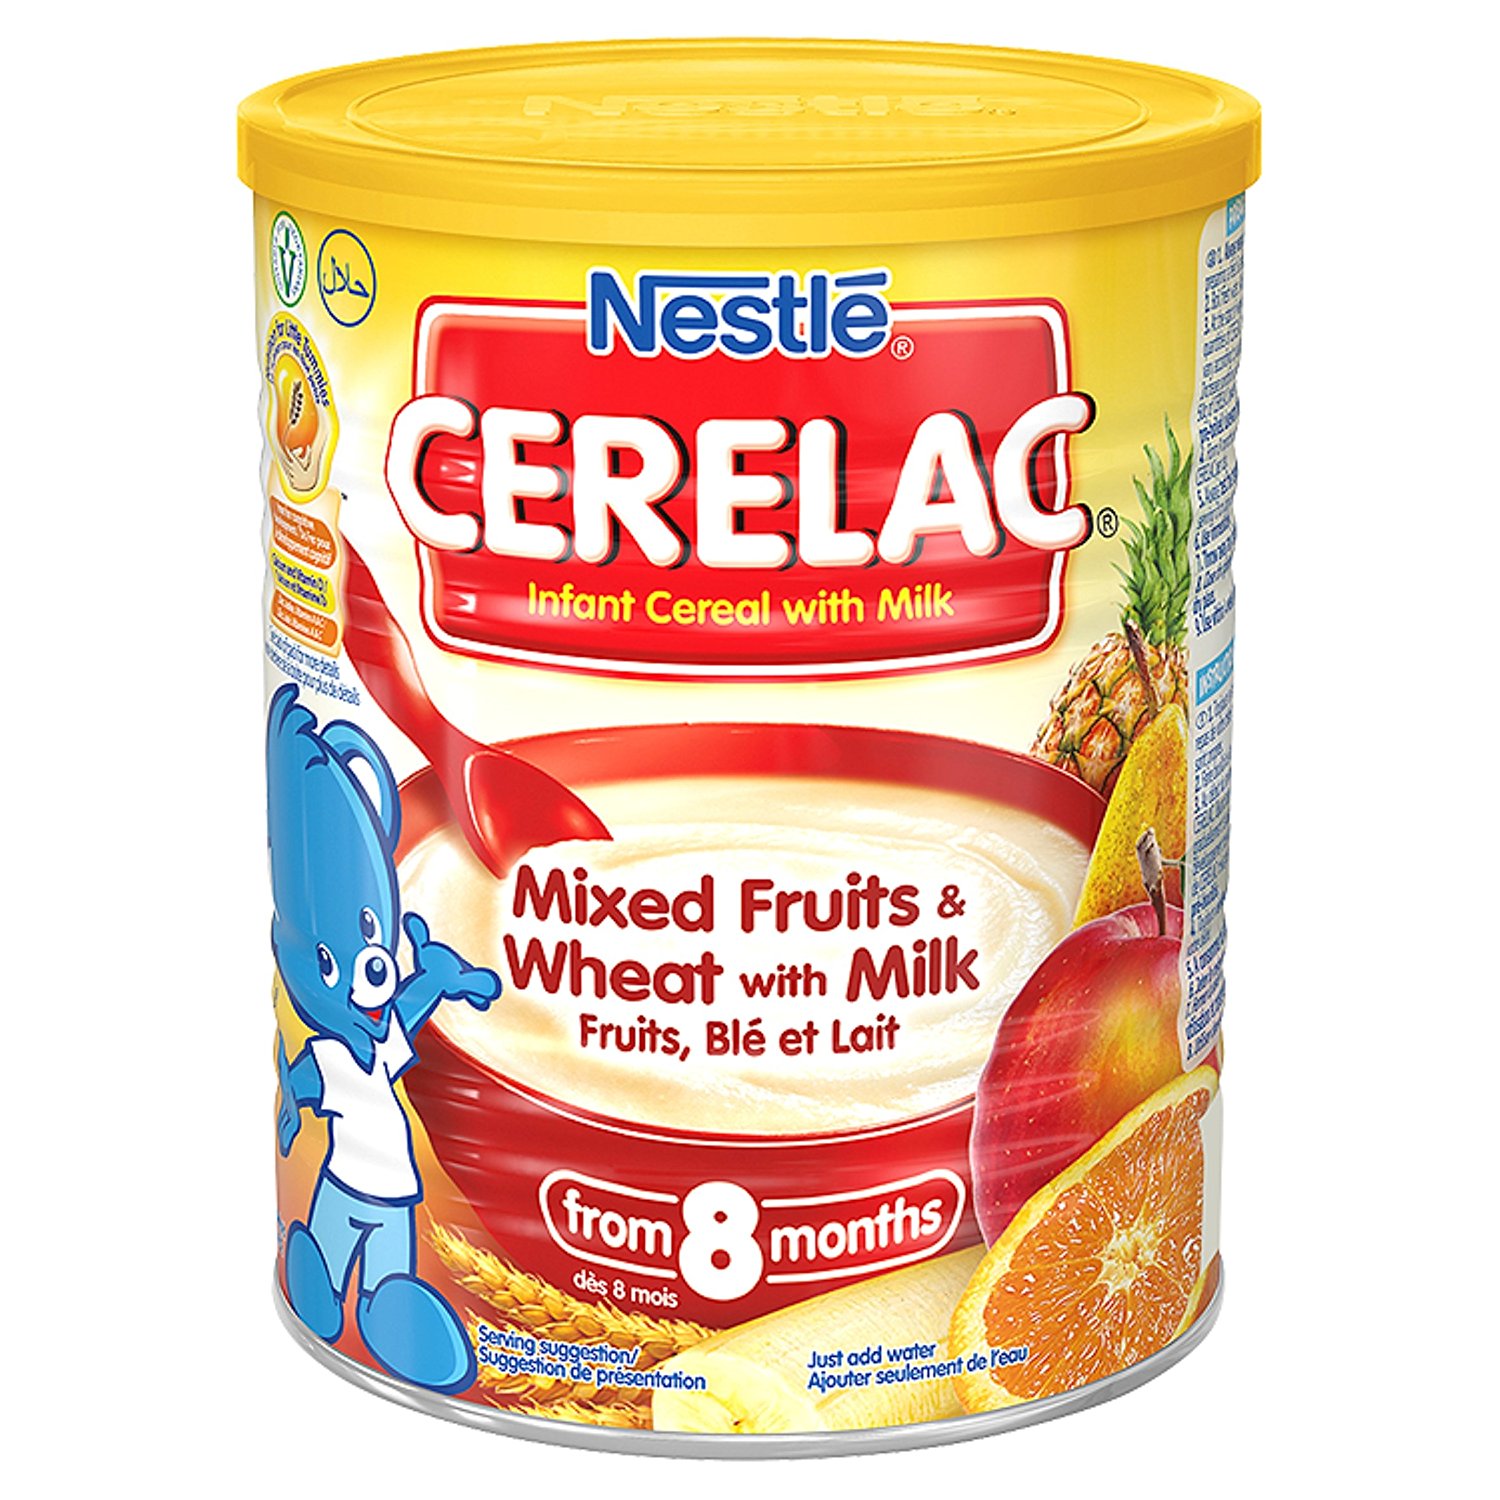 Nestle Cerelac, Mixed Fruits & Wheat with Milk, 14.1 Ounce Cans ...